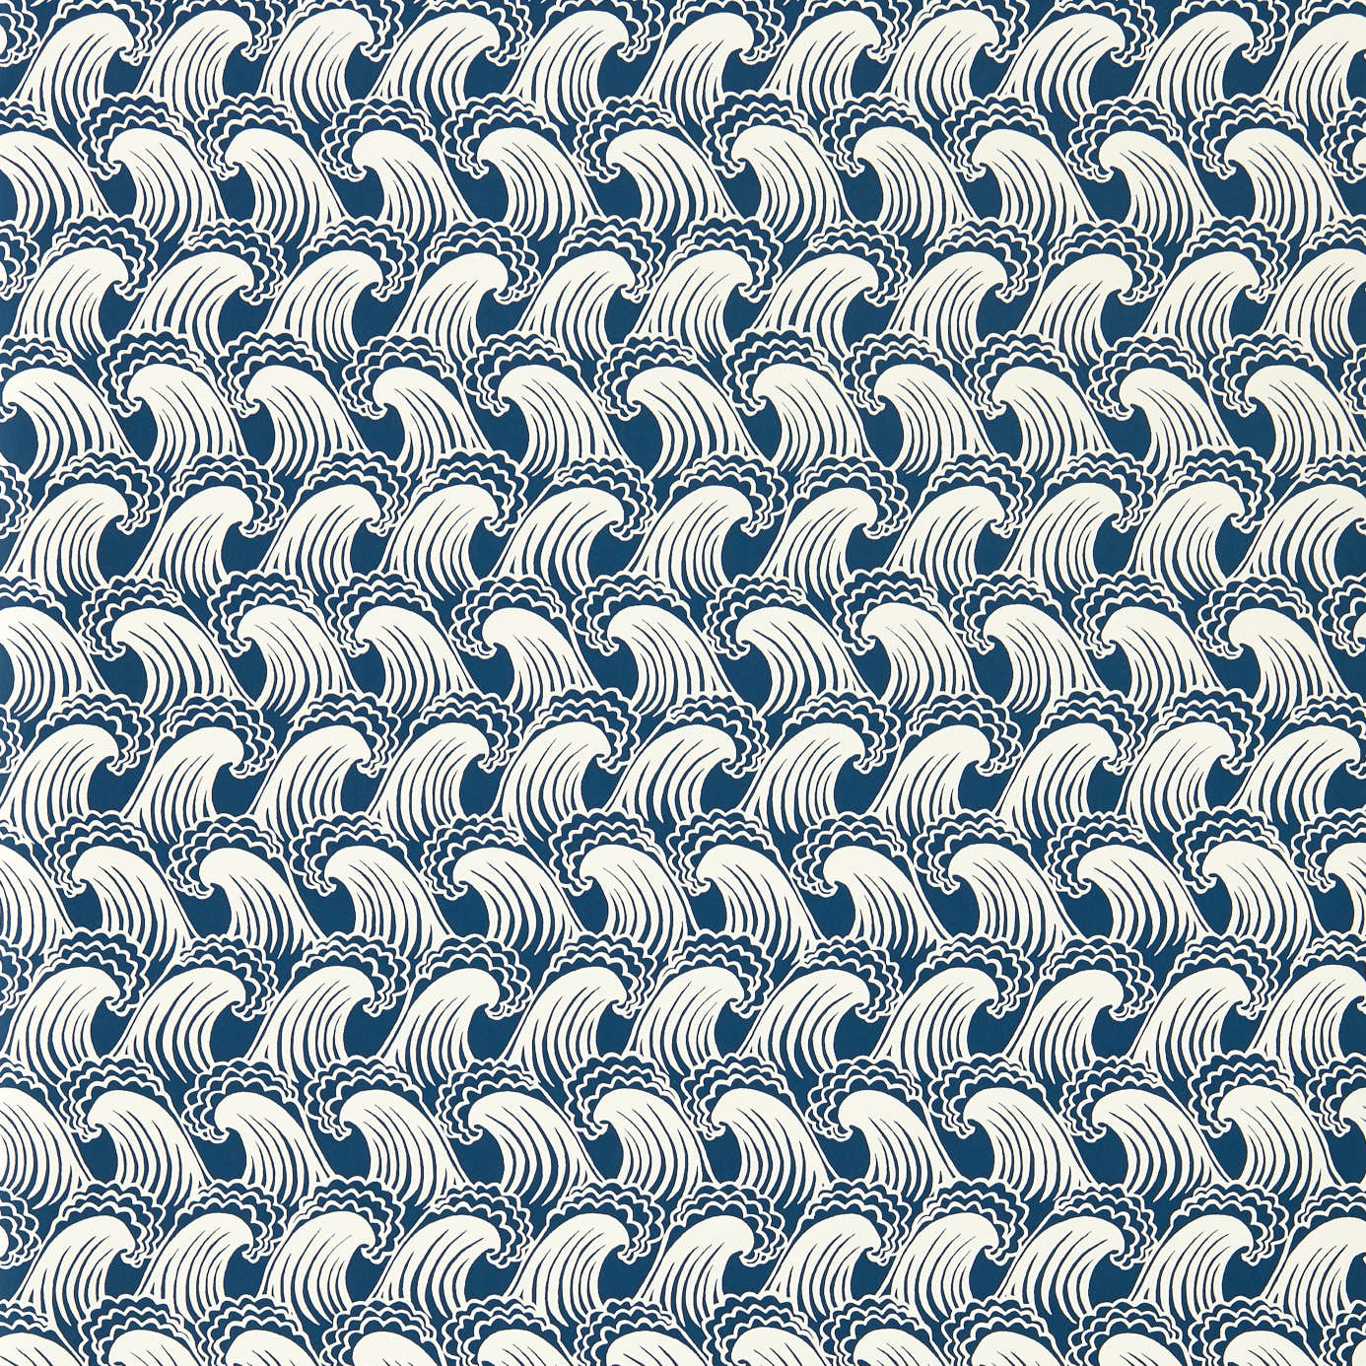 Ride the Wave Denim Wallpaper NART112807 by Scion